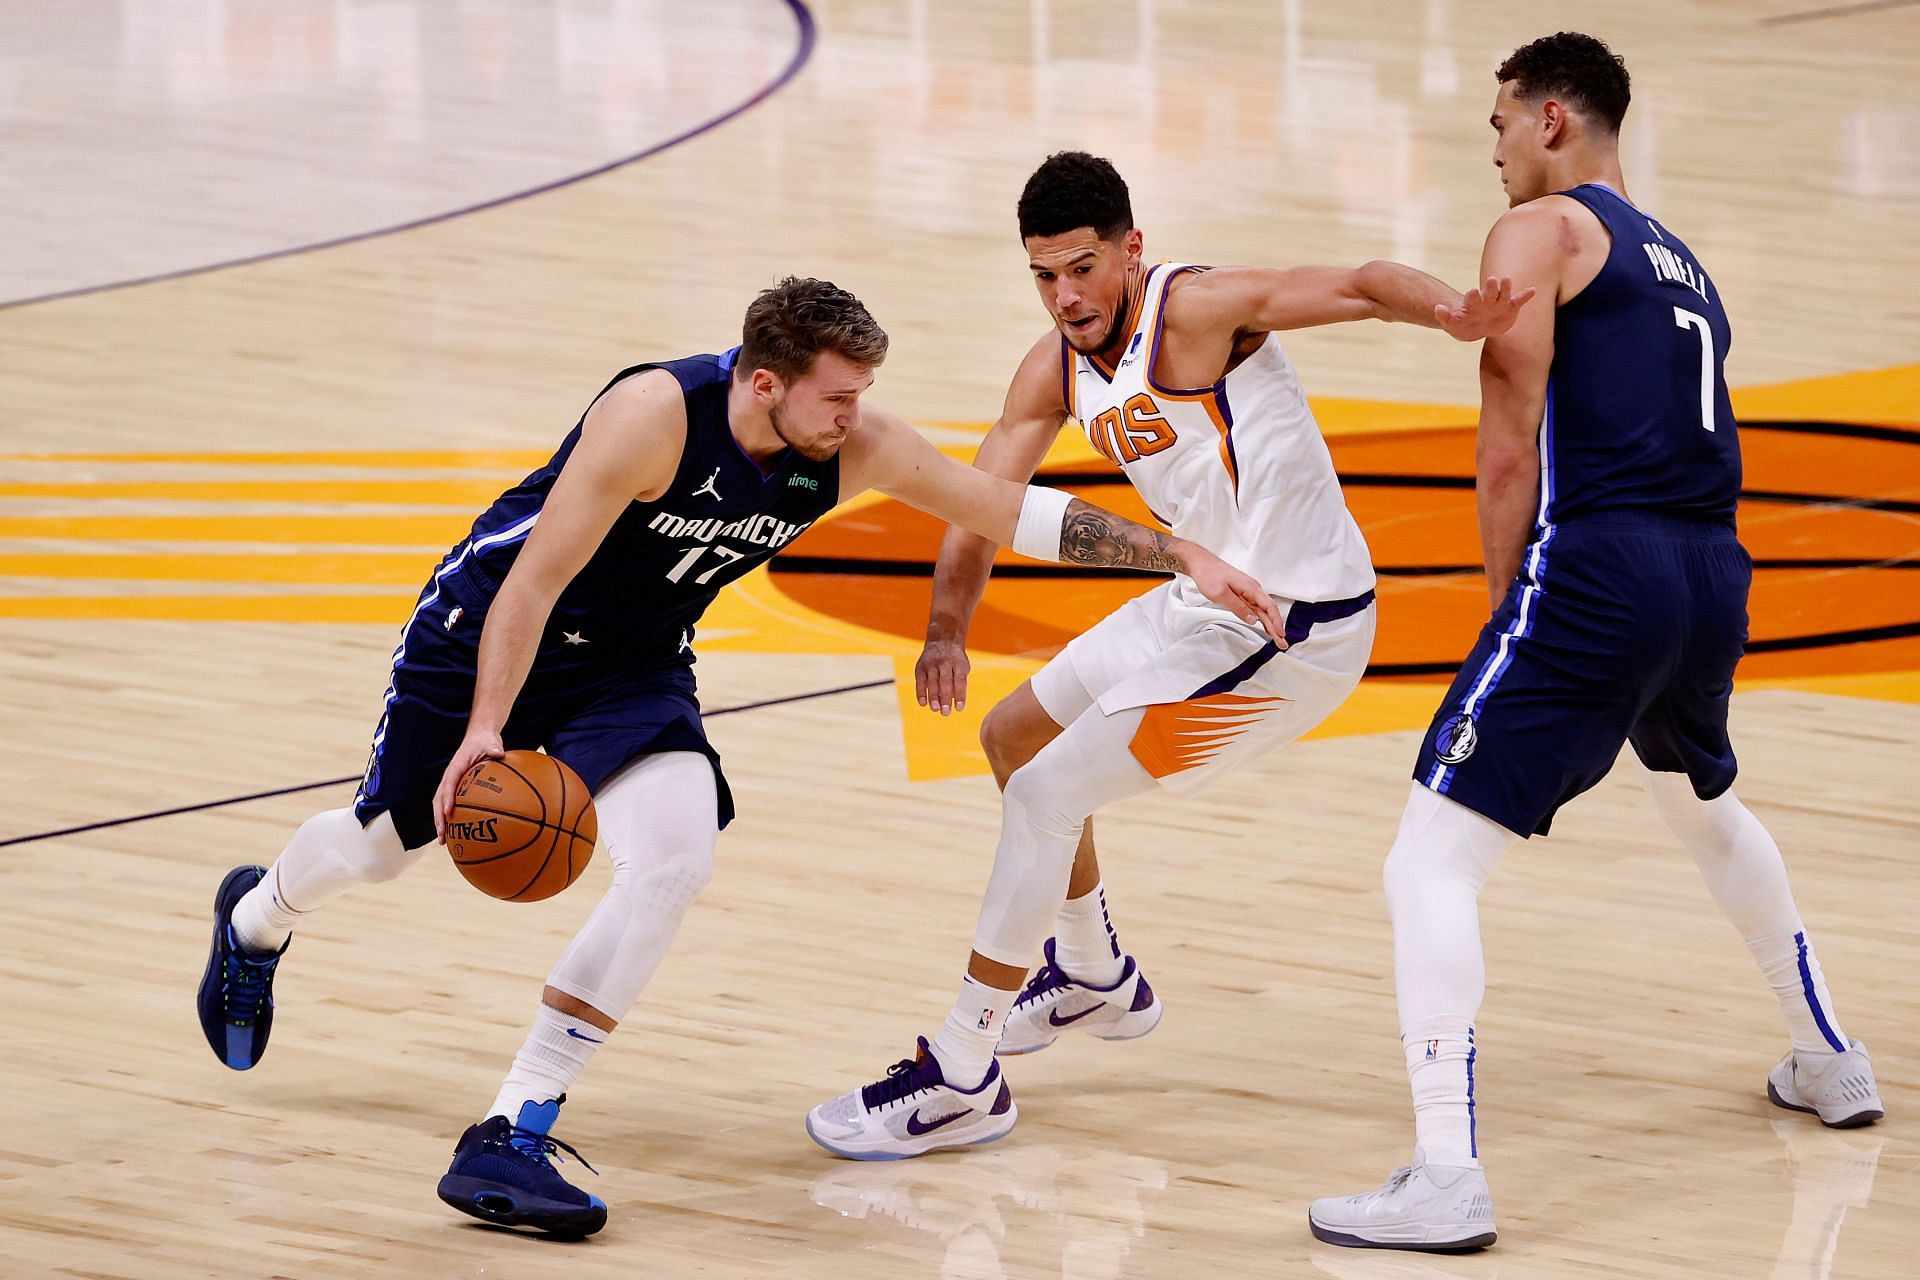 Luka Doncic of the Dallas Mavericks against Devin Booker of the Phoenix Suns